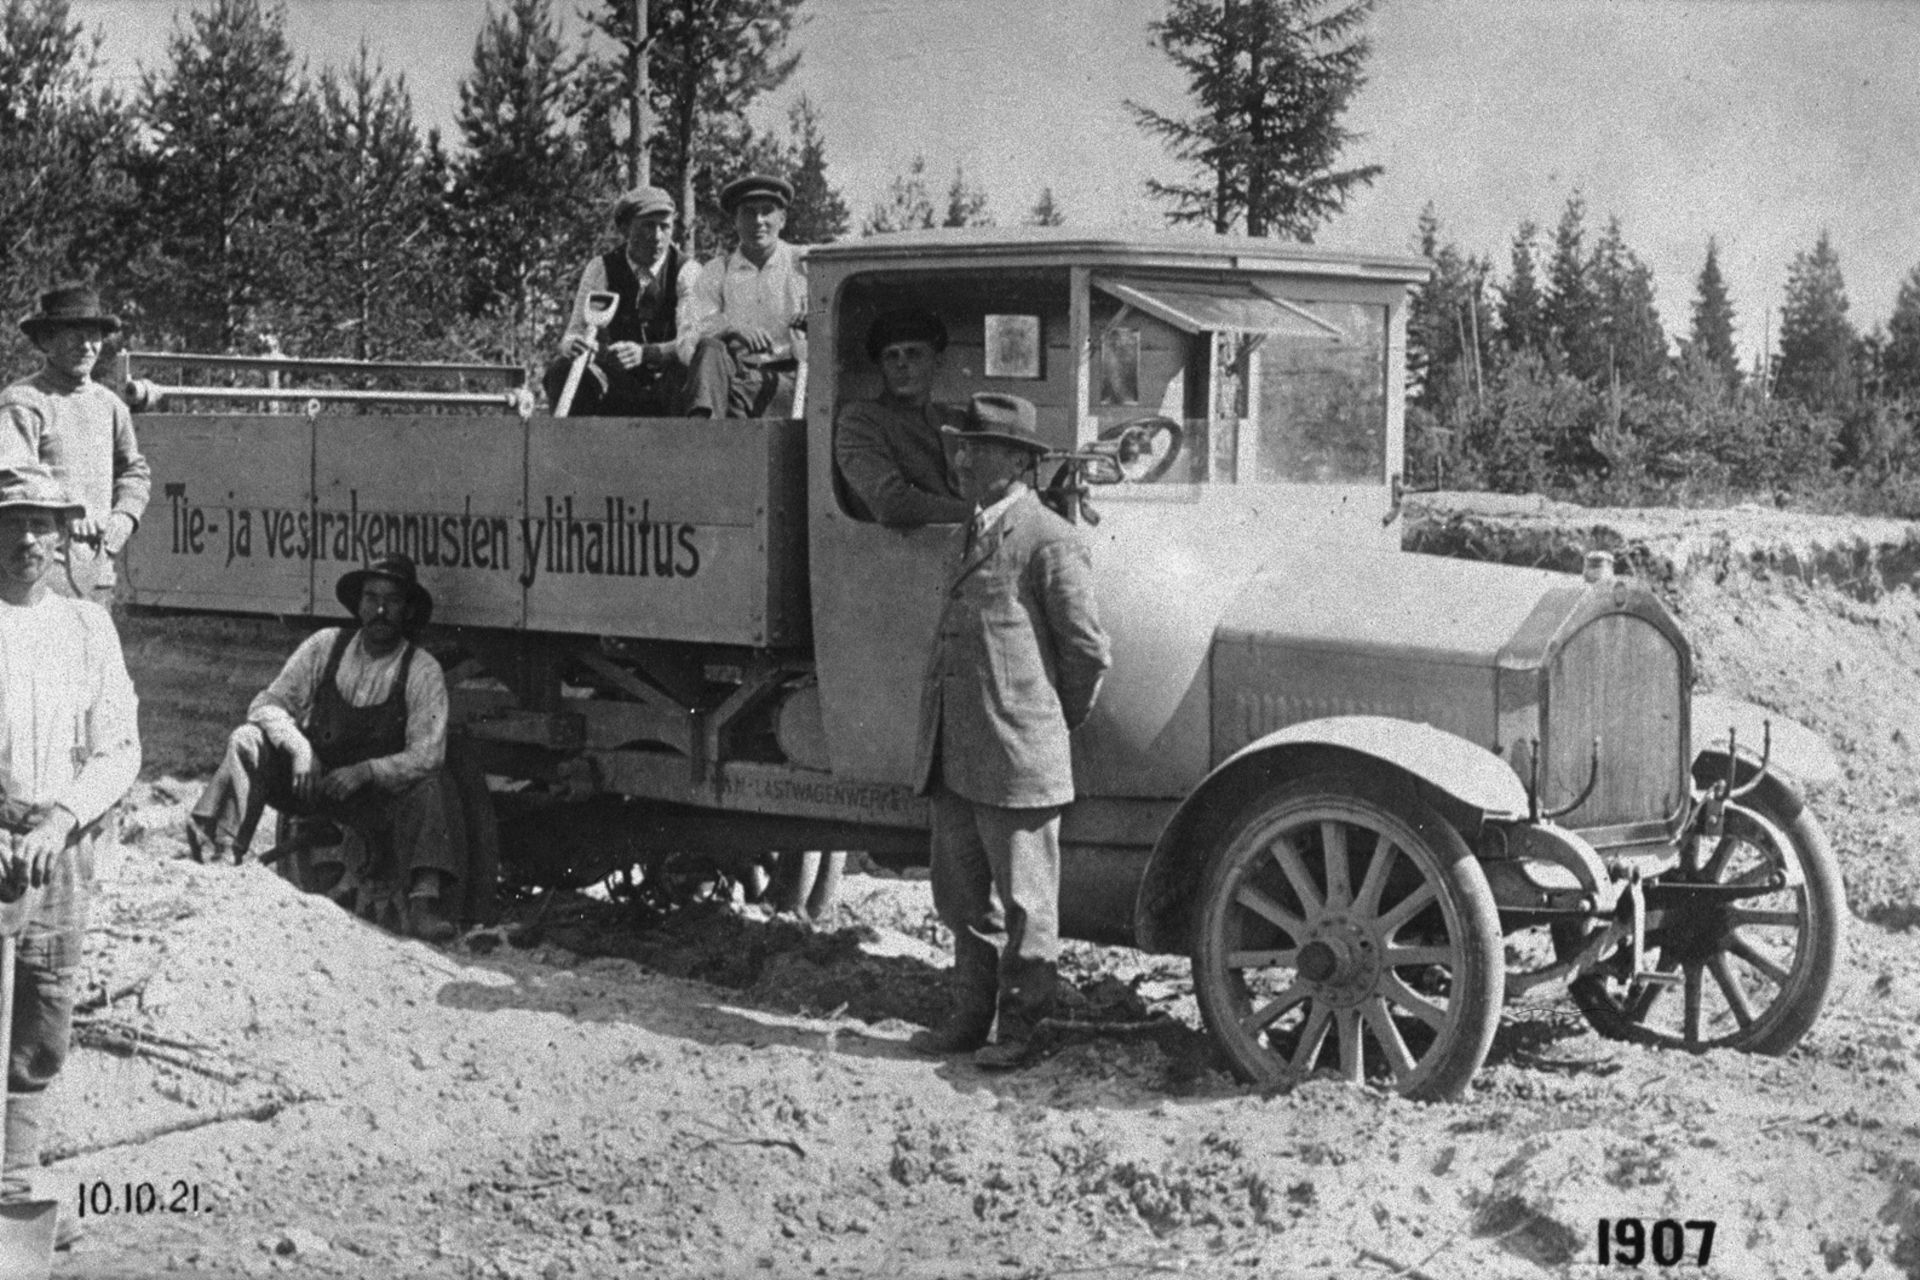 Old black and white image of MAN LKW Supreme Road and Hydraulic Engineering Authority of Finland